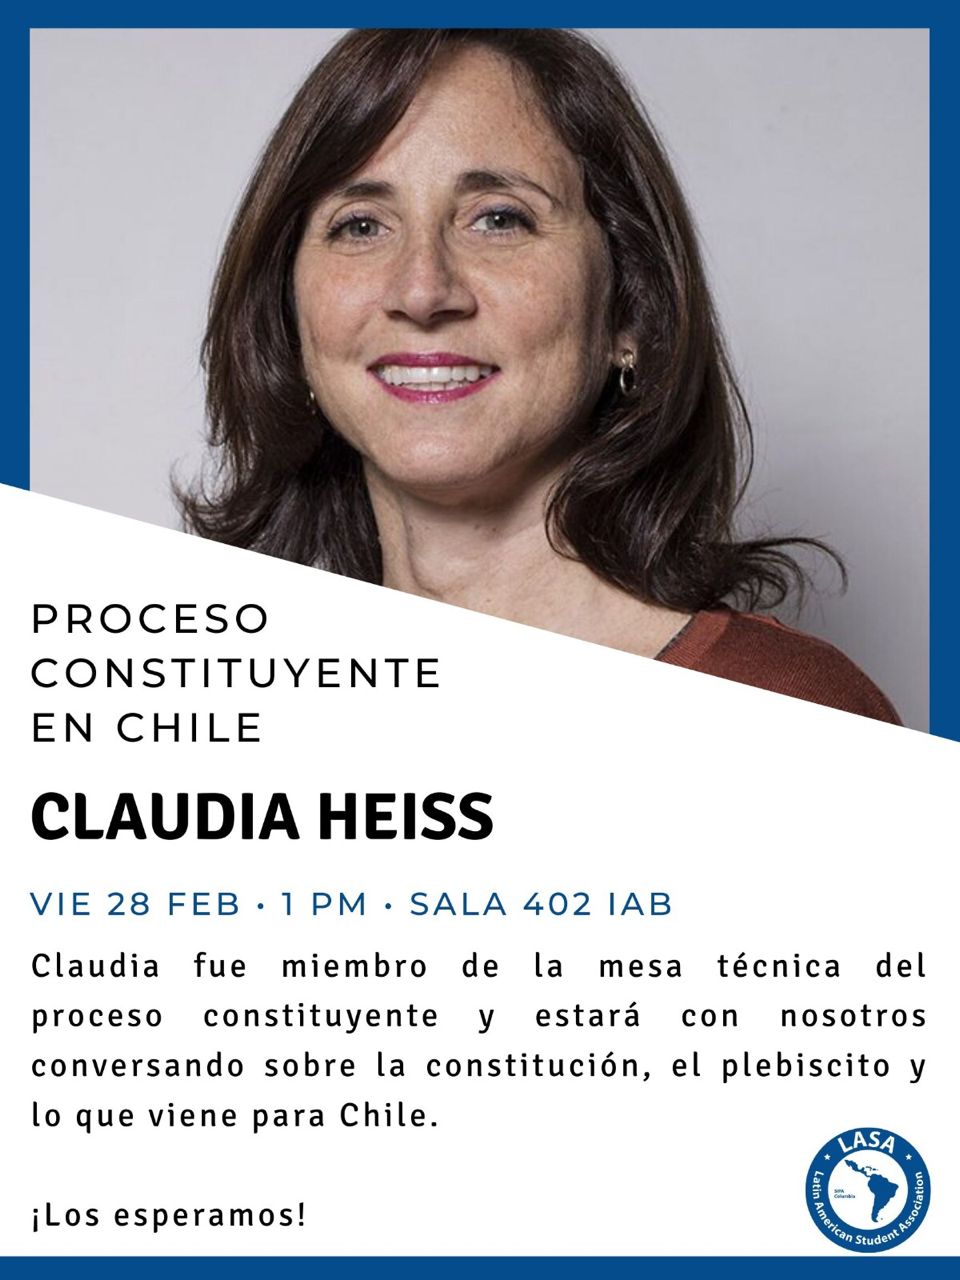 Claudia Heiss, Chile's Political Process